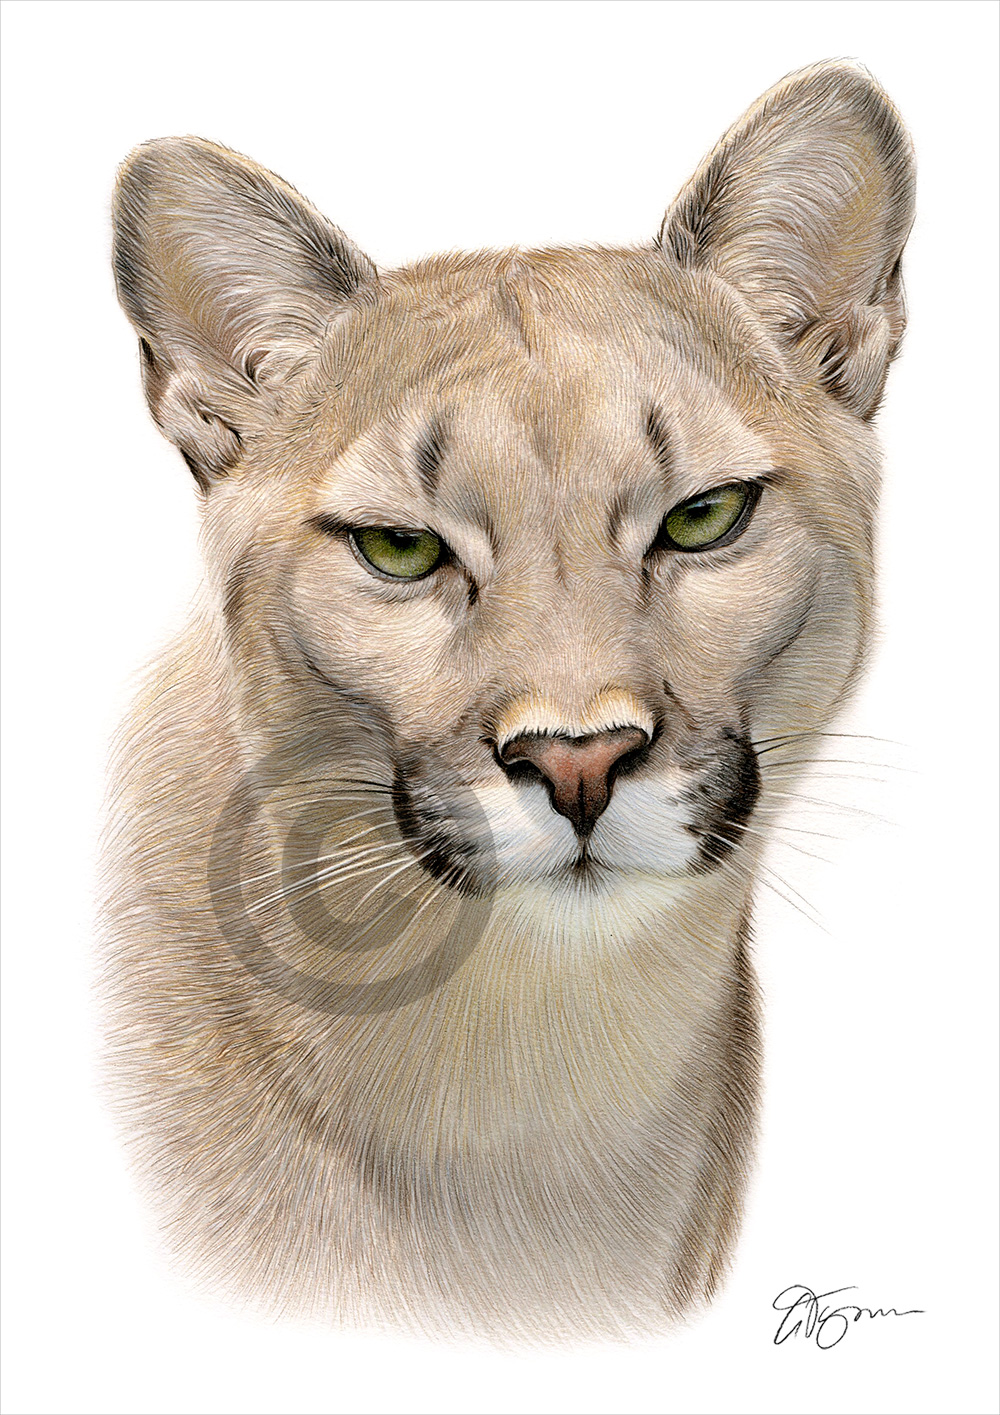 Colour pencil drawing of a cougar by artist Gary Tymon